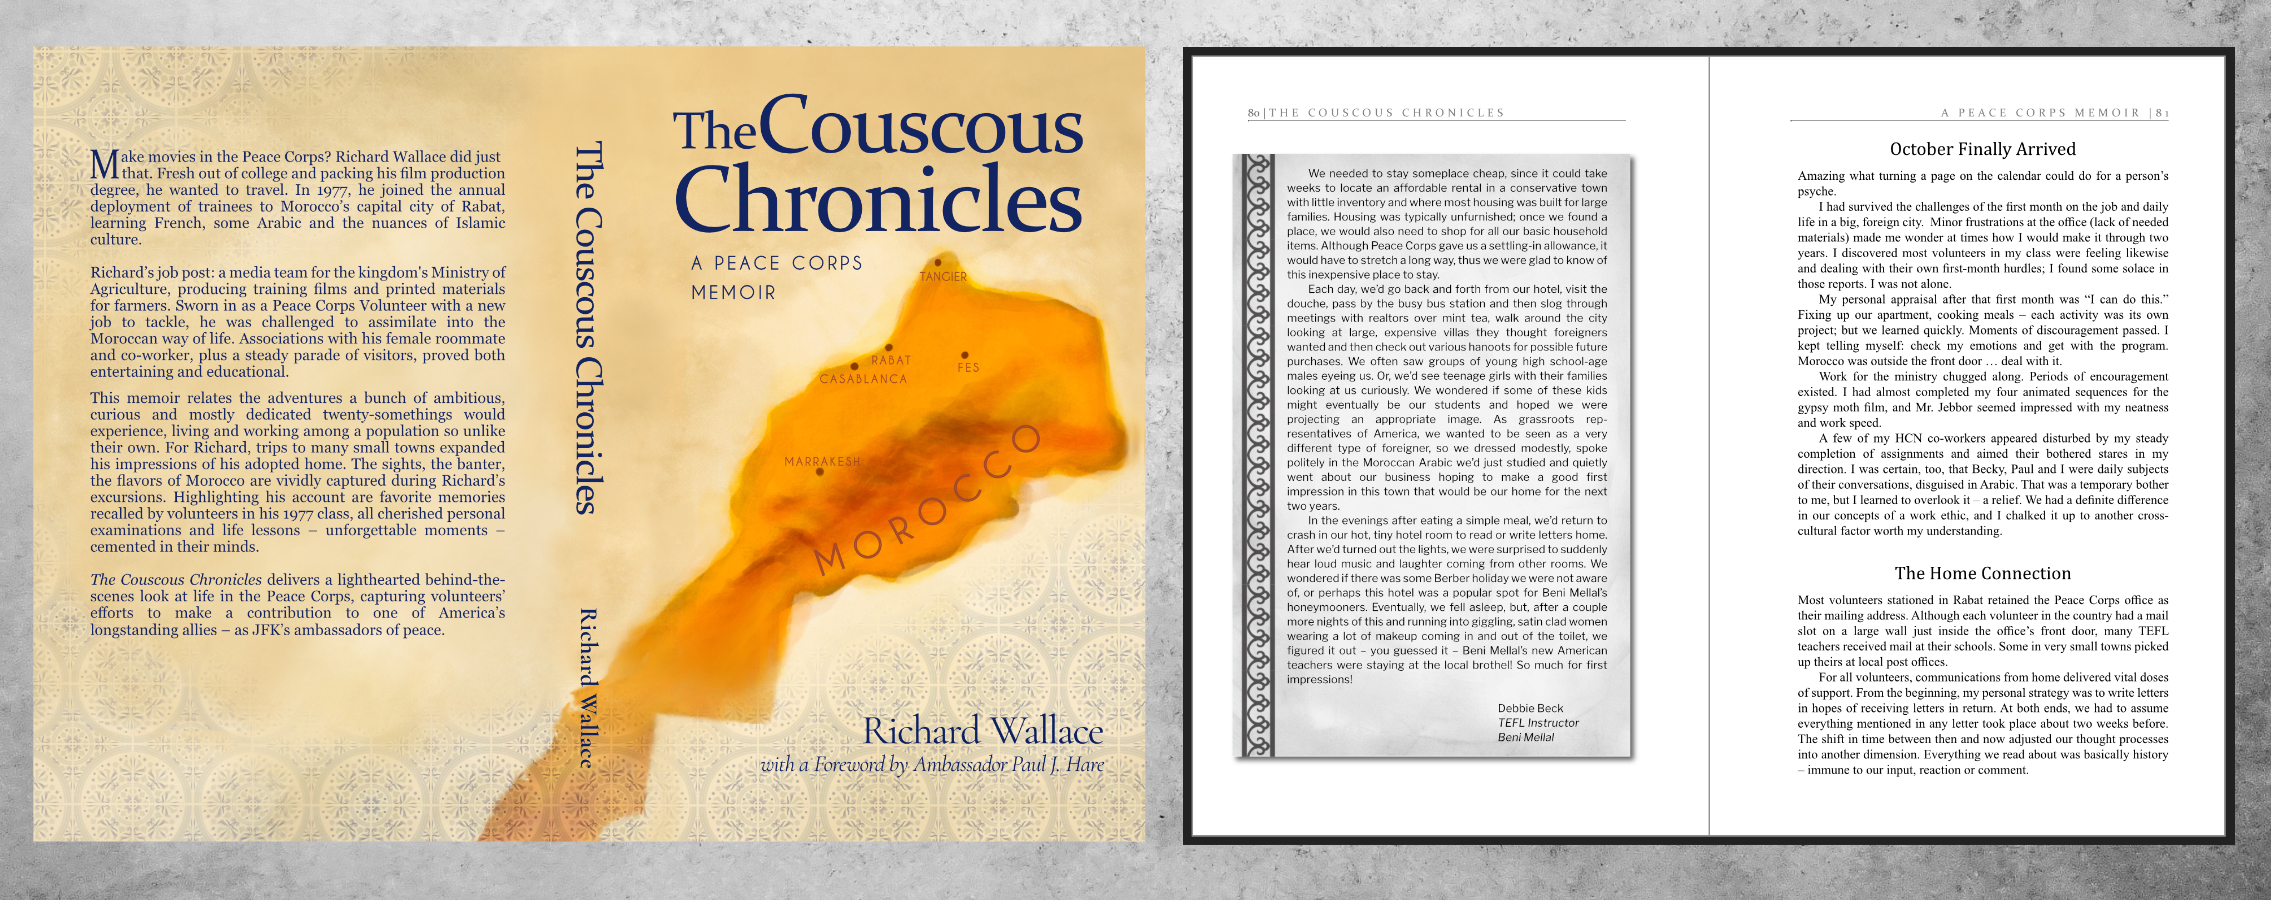 Example image of book The Couscous Chronicles by Richard Wallace